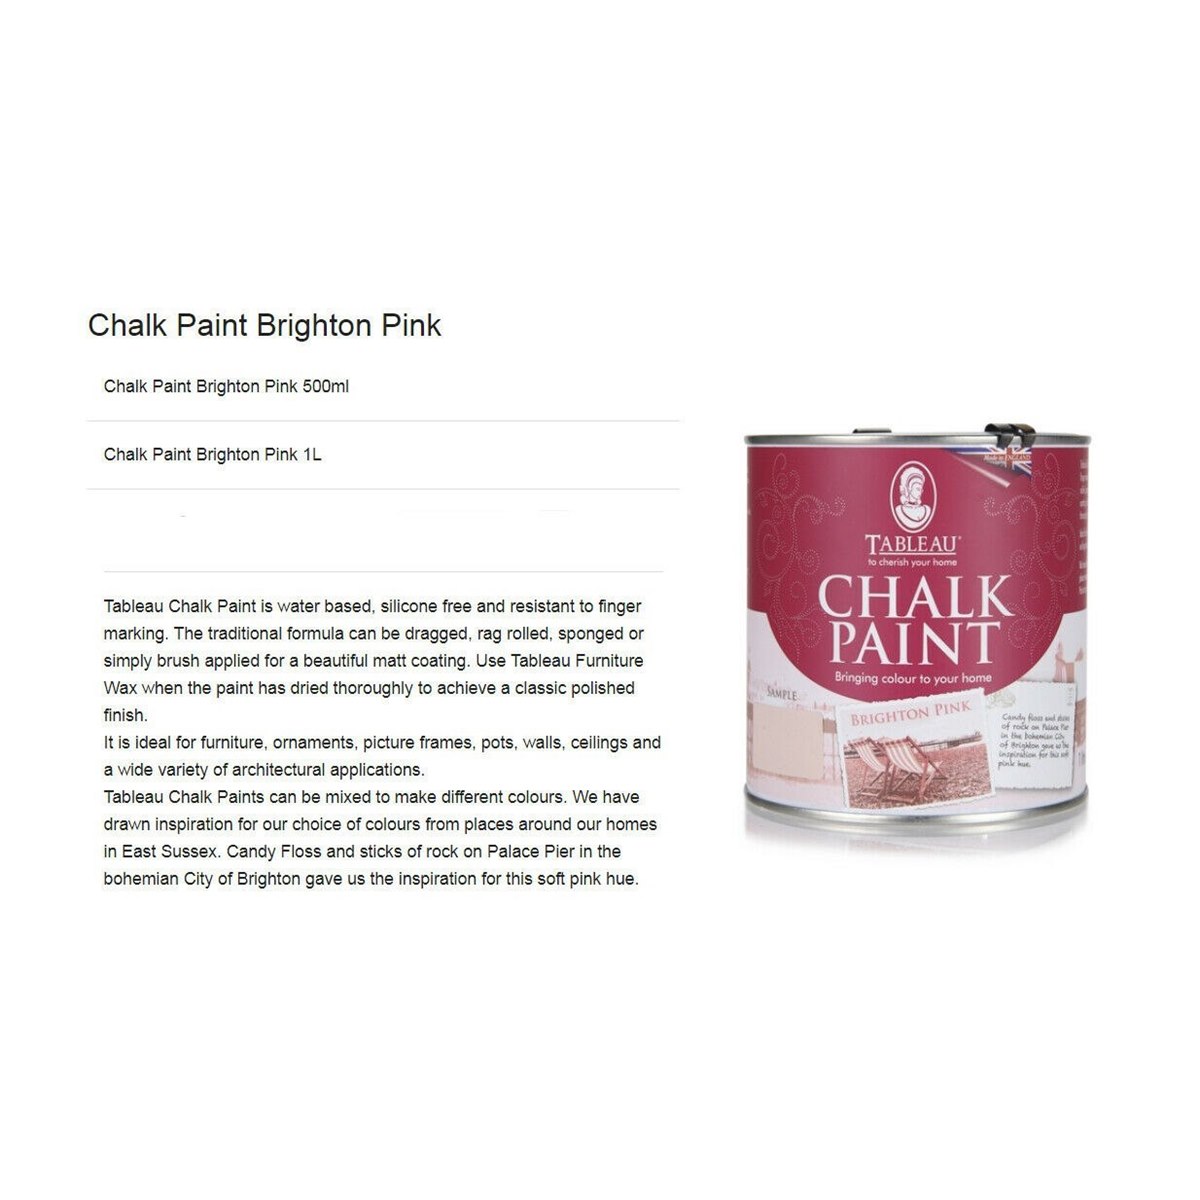 Tableau Chalky Paint Brighton Pink